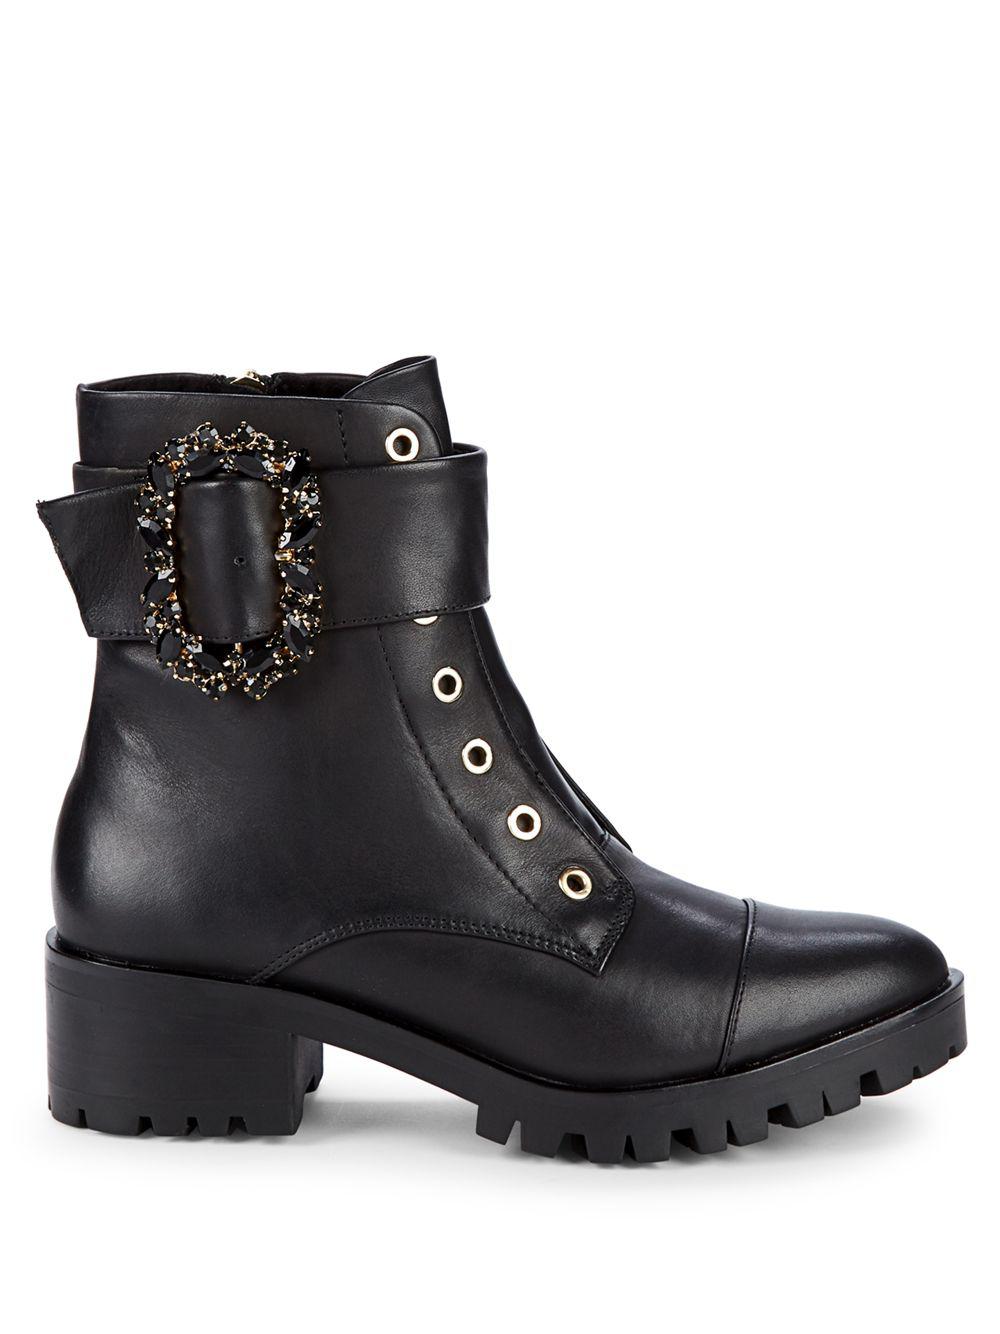 Karl Lagerfeld Piper Embellished Leather Combat Boots in Black - Lyst